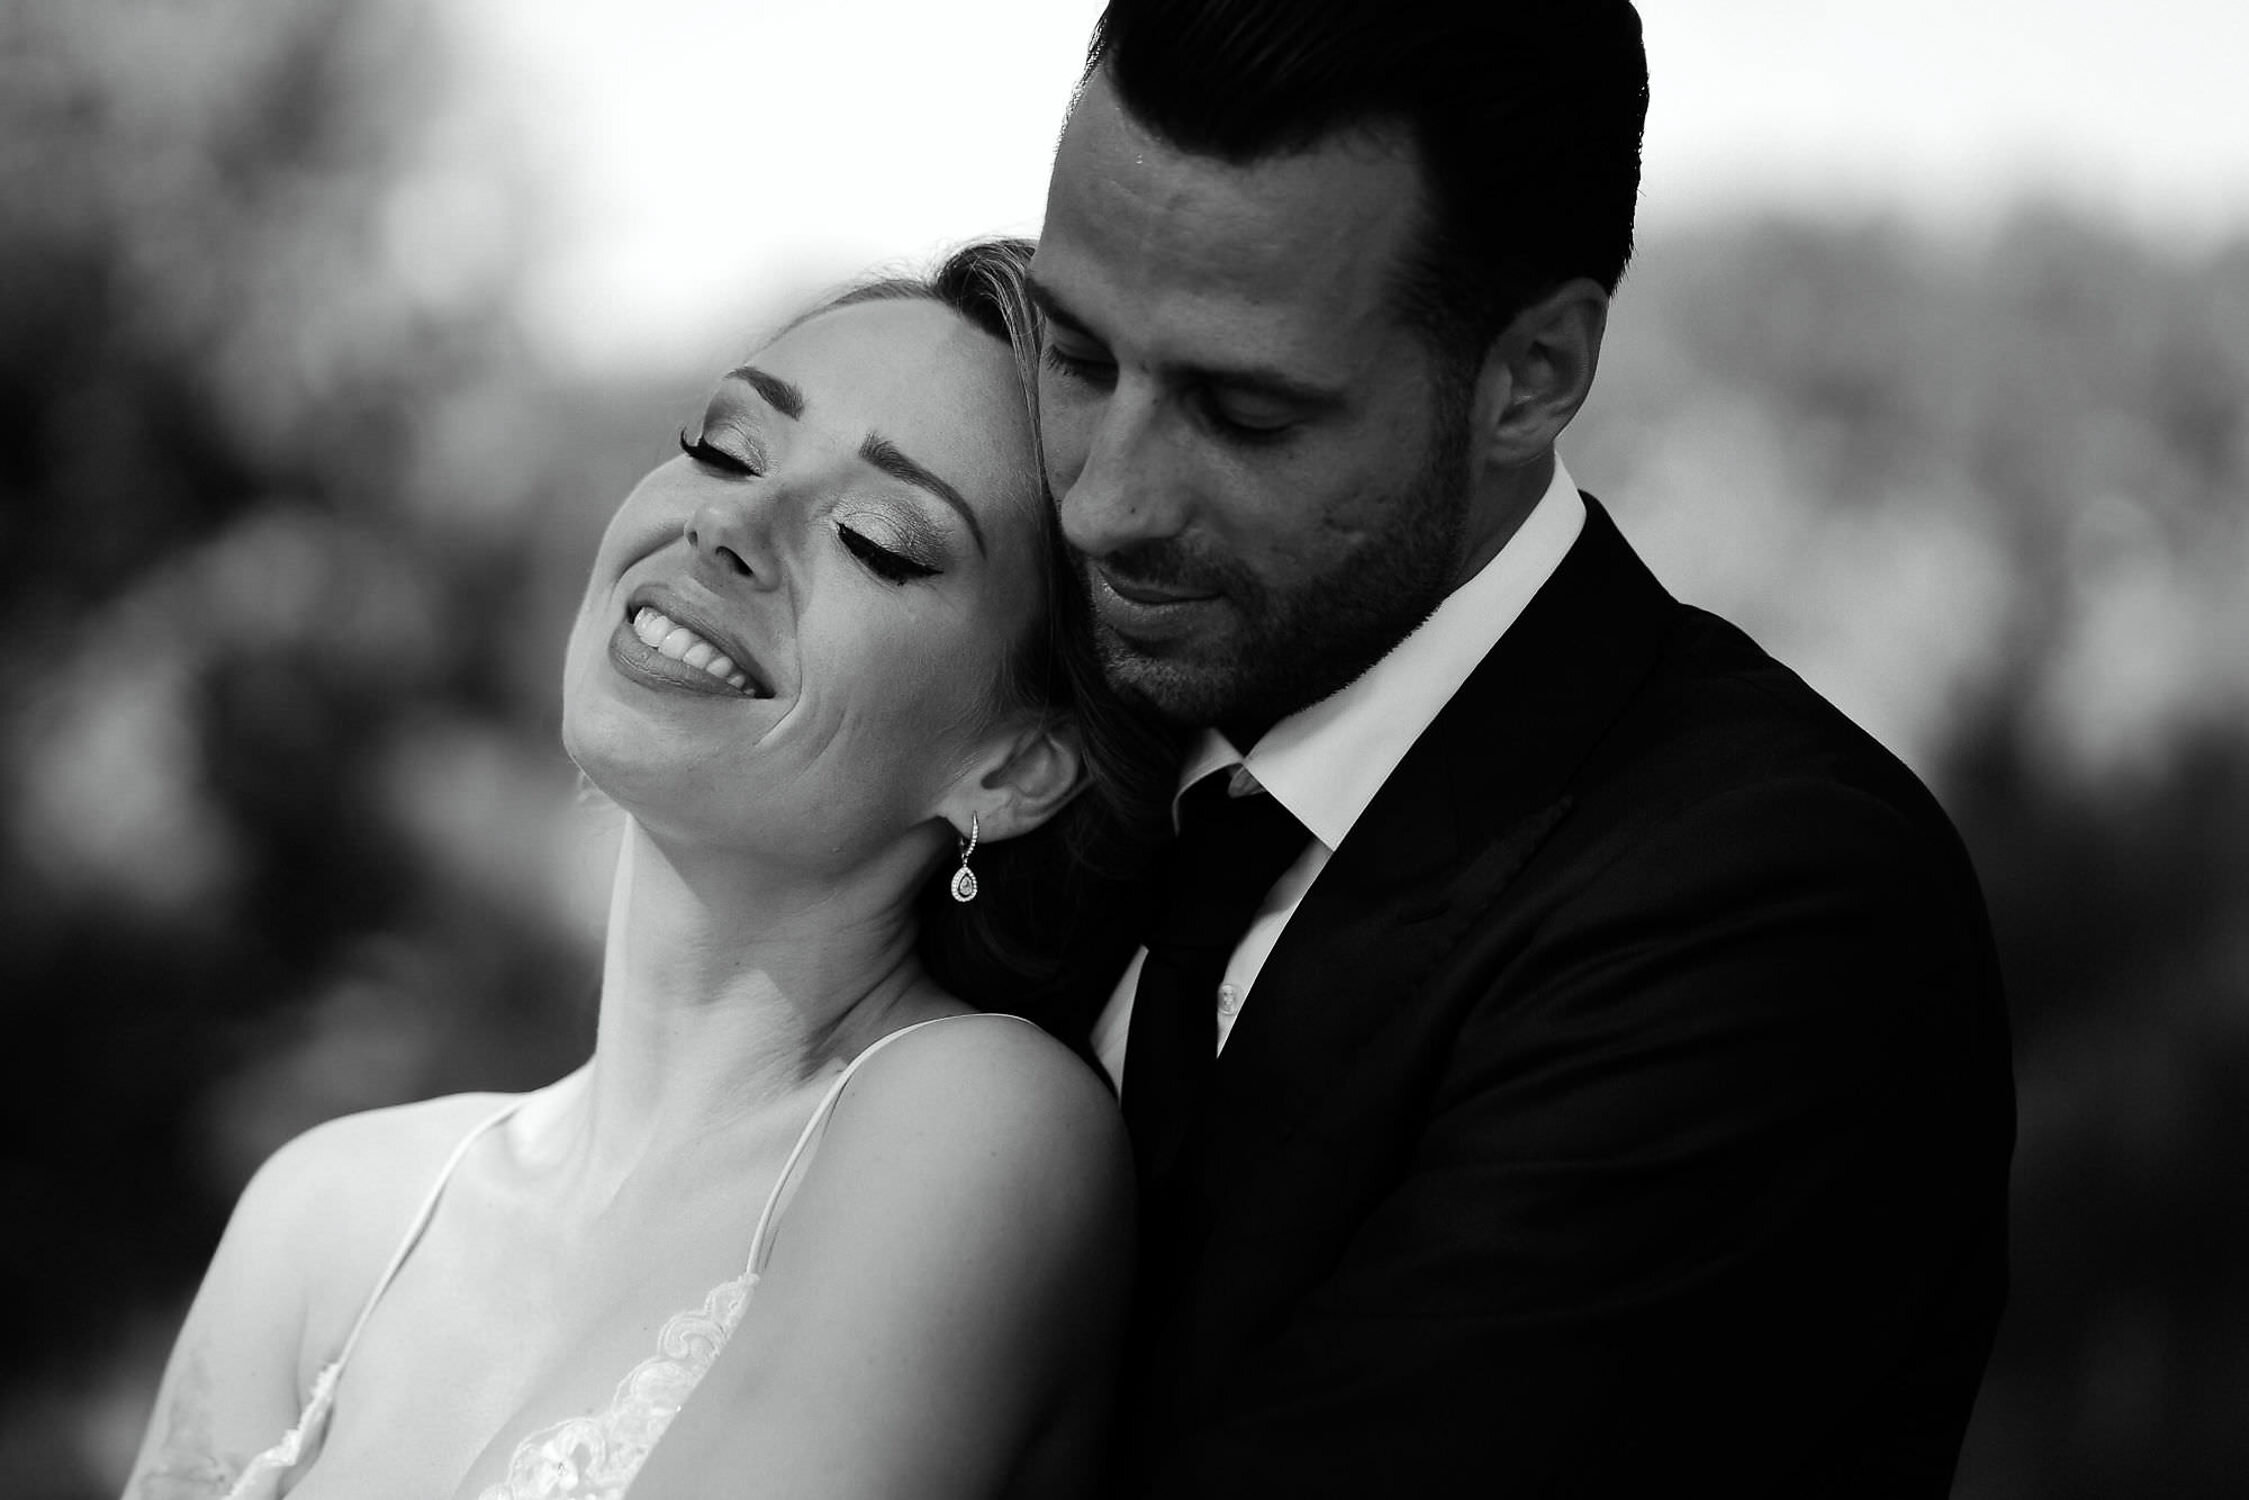 romantic portrait of wedding couple after the wedding in rotterdam by mark hadden amsterdam wedding photographer